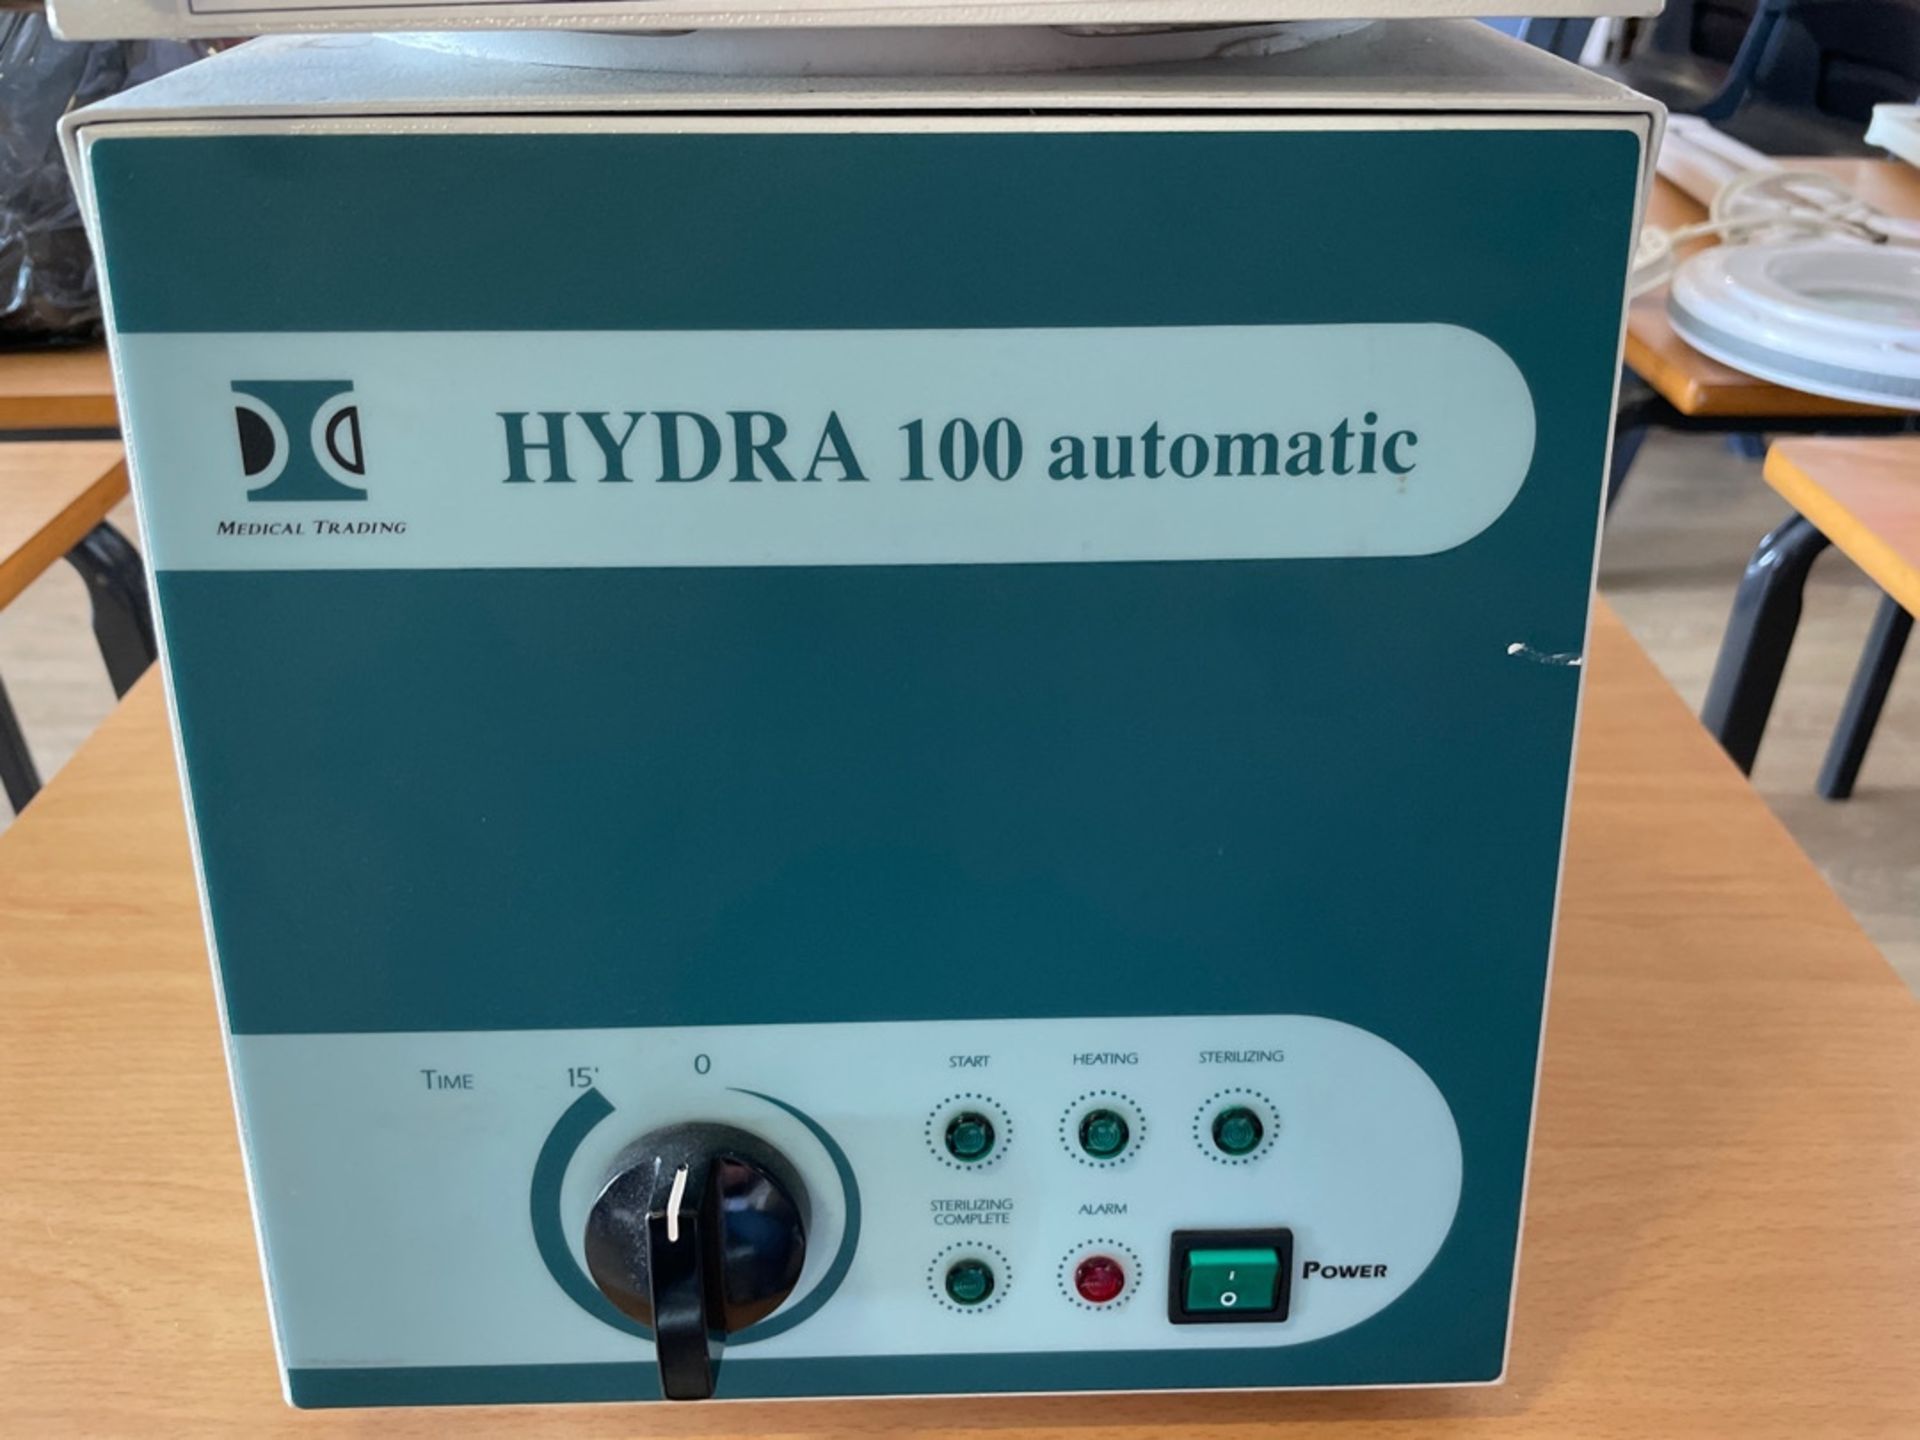 Medical Trading Hydra 100 Automatic Autoclave - Image 2 of 4